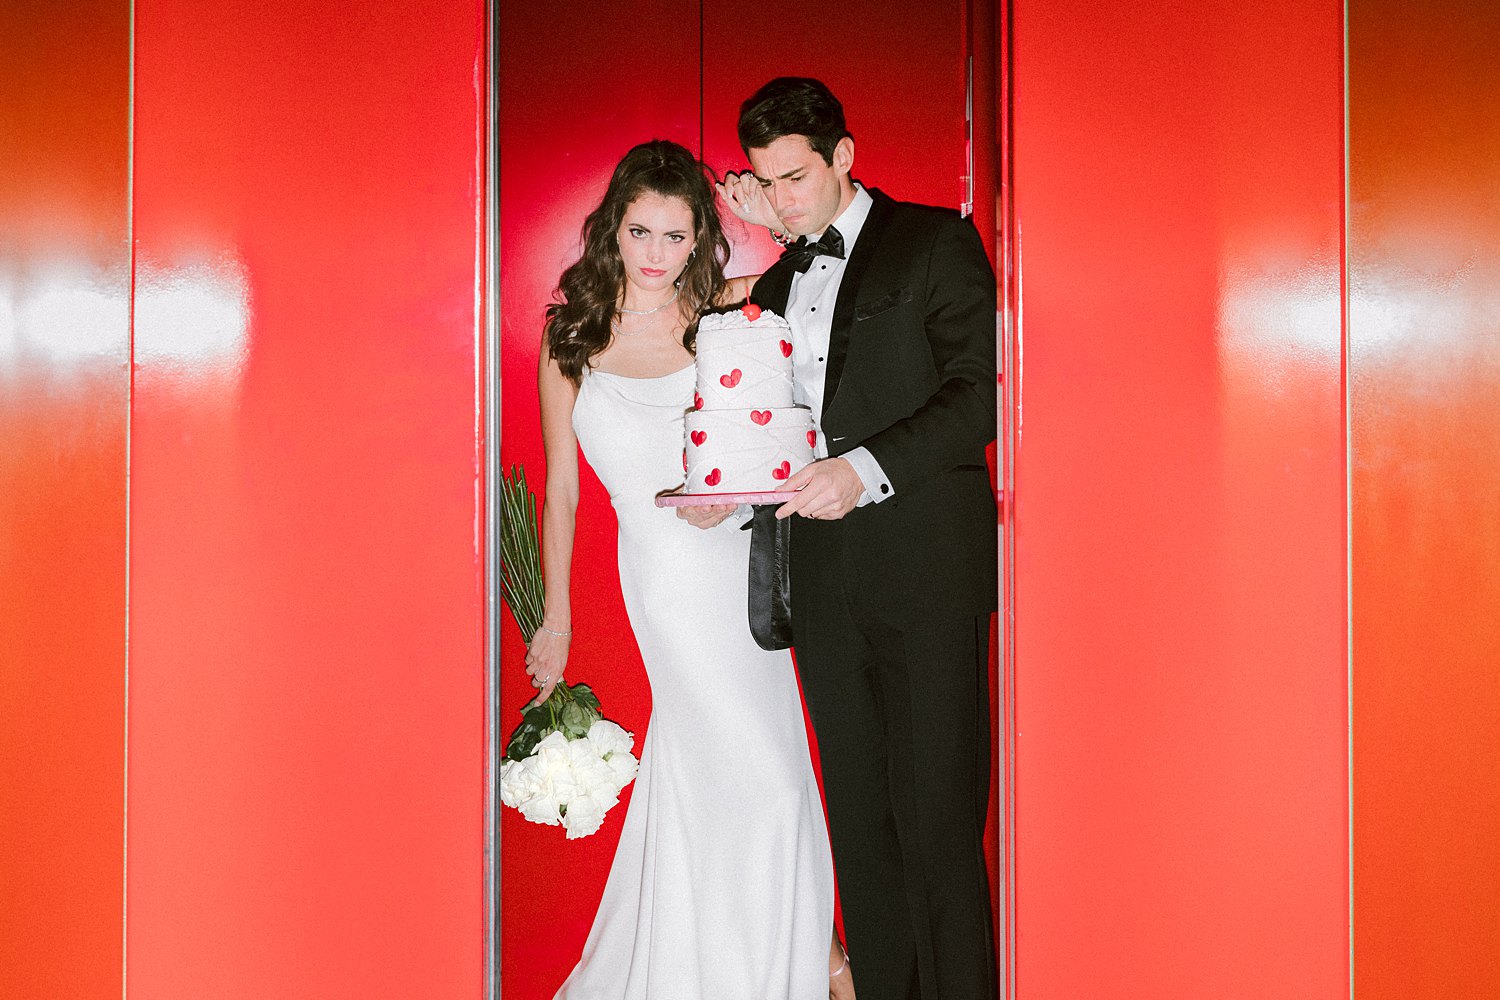 Man in black tuxedo standing with cake in hands next to woman in white dress holding flower bouquet in red elevator